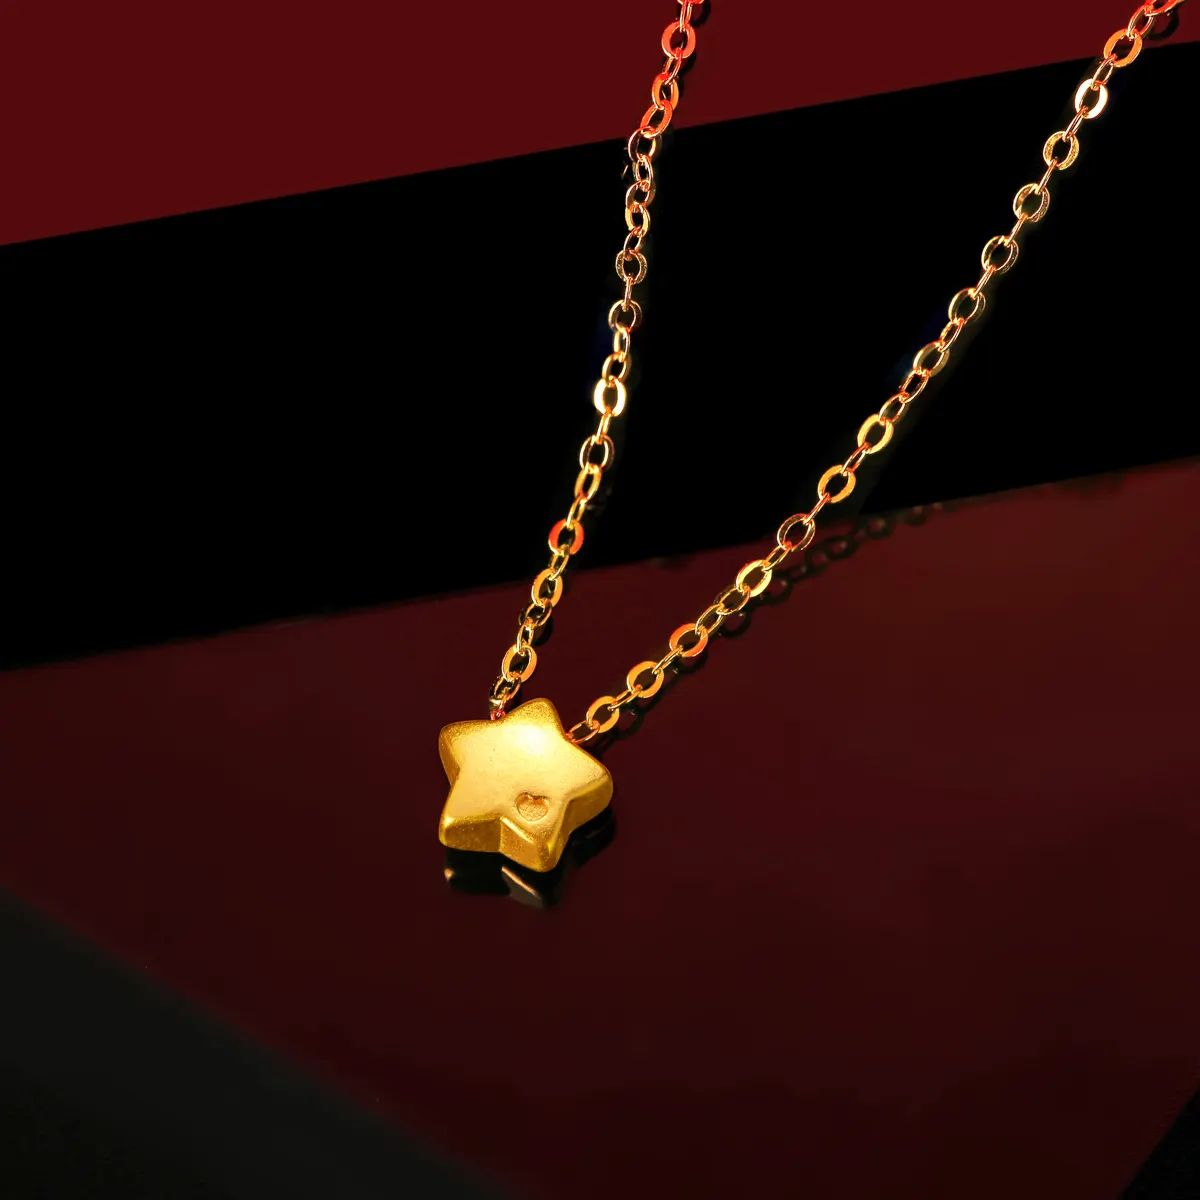 New Arrival Classic Style 24K Gold Three-Dimensional Necklace Pendant For Women With Star Shape High Quality Women Necklace